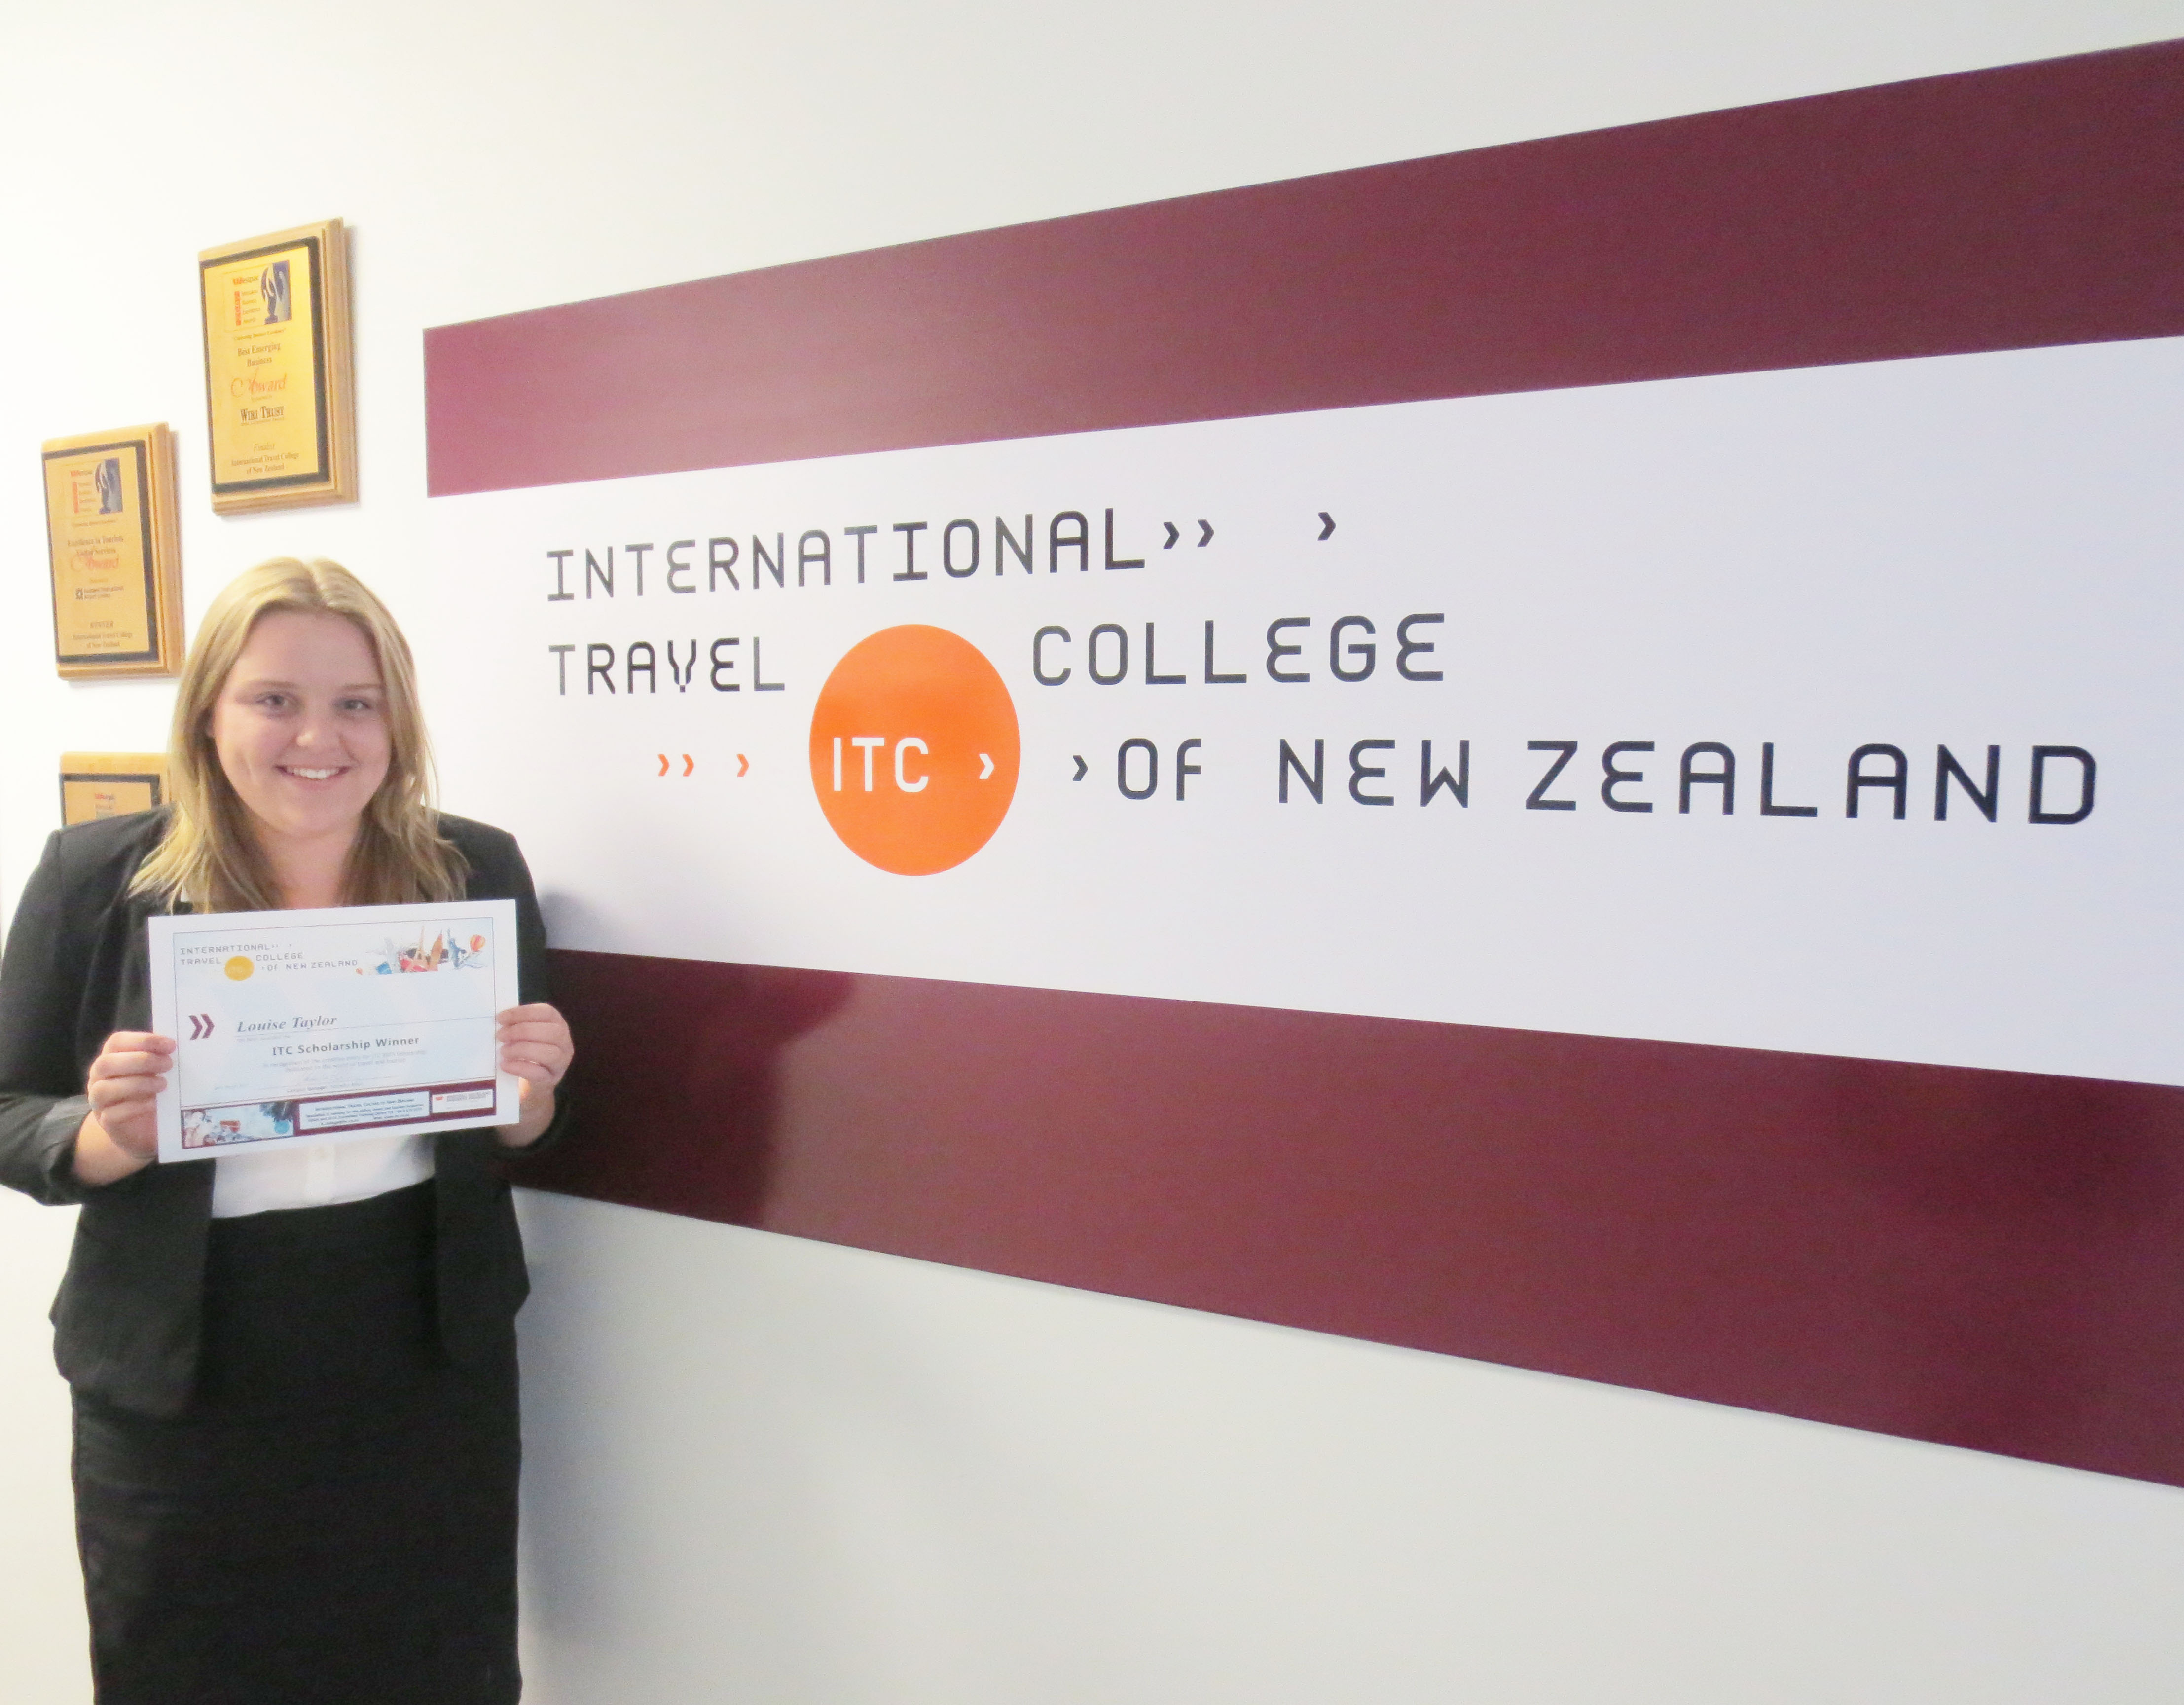 ITC scholarship winner Louise Taylor was recommended by her teachers and Dean for her outstanding attitude and passion for travel and tourism